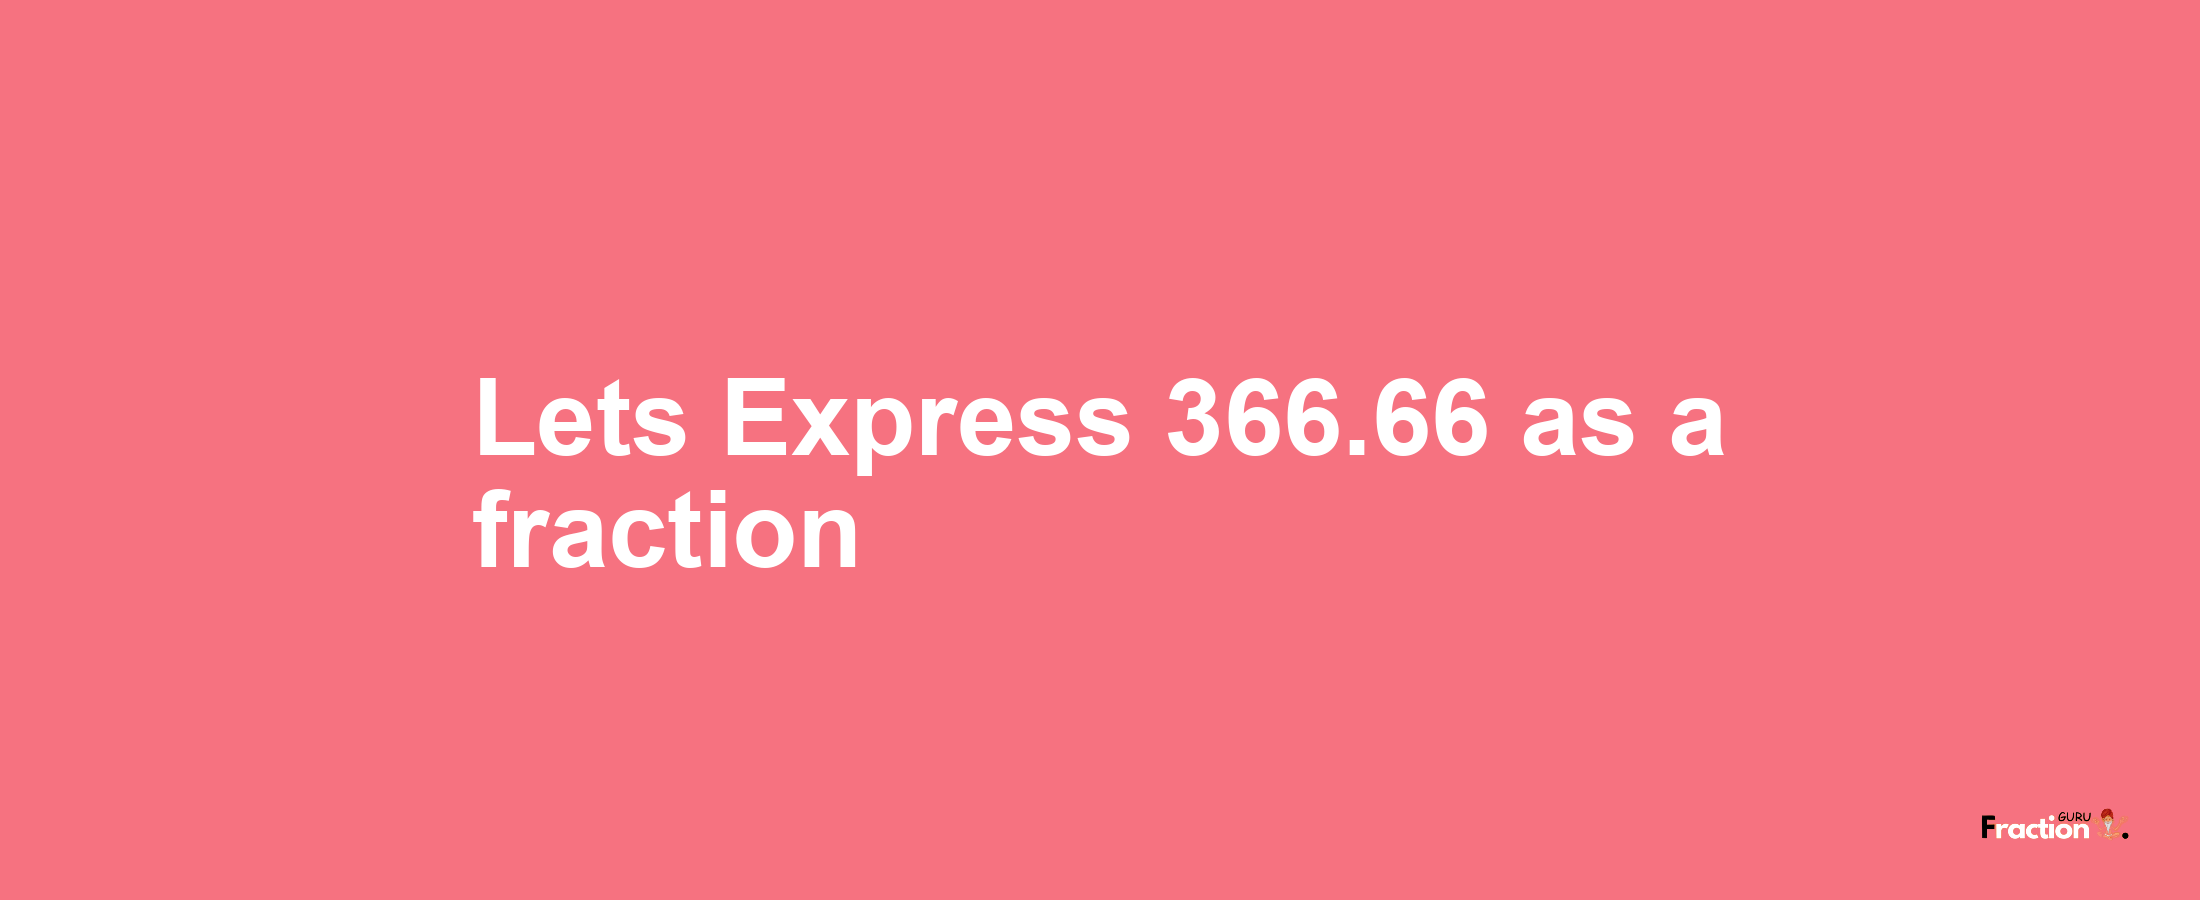 Lets Express 366.66 as afraction